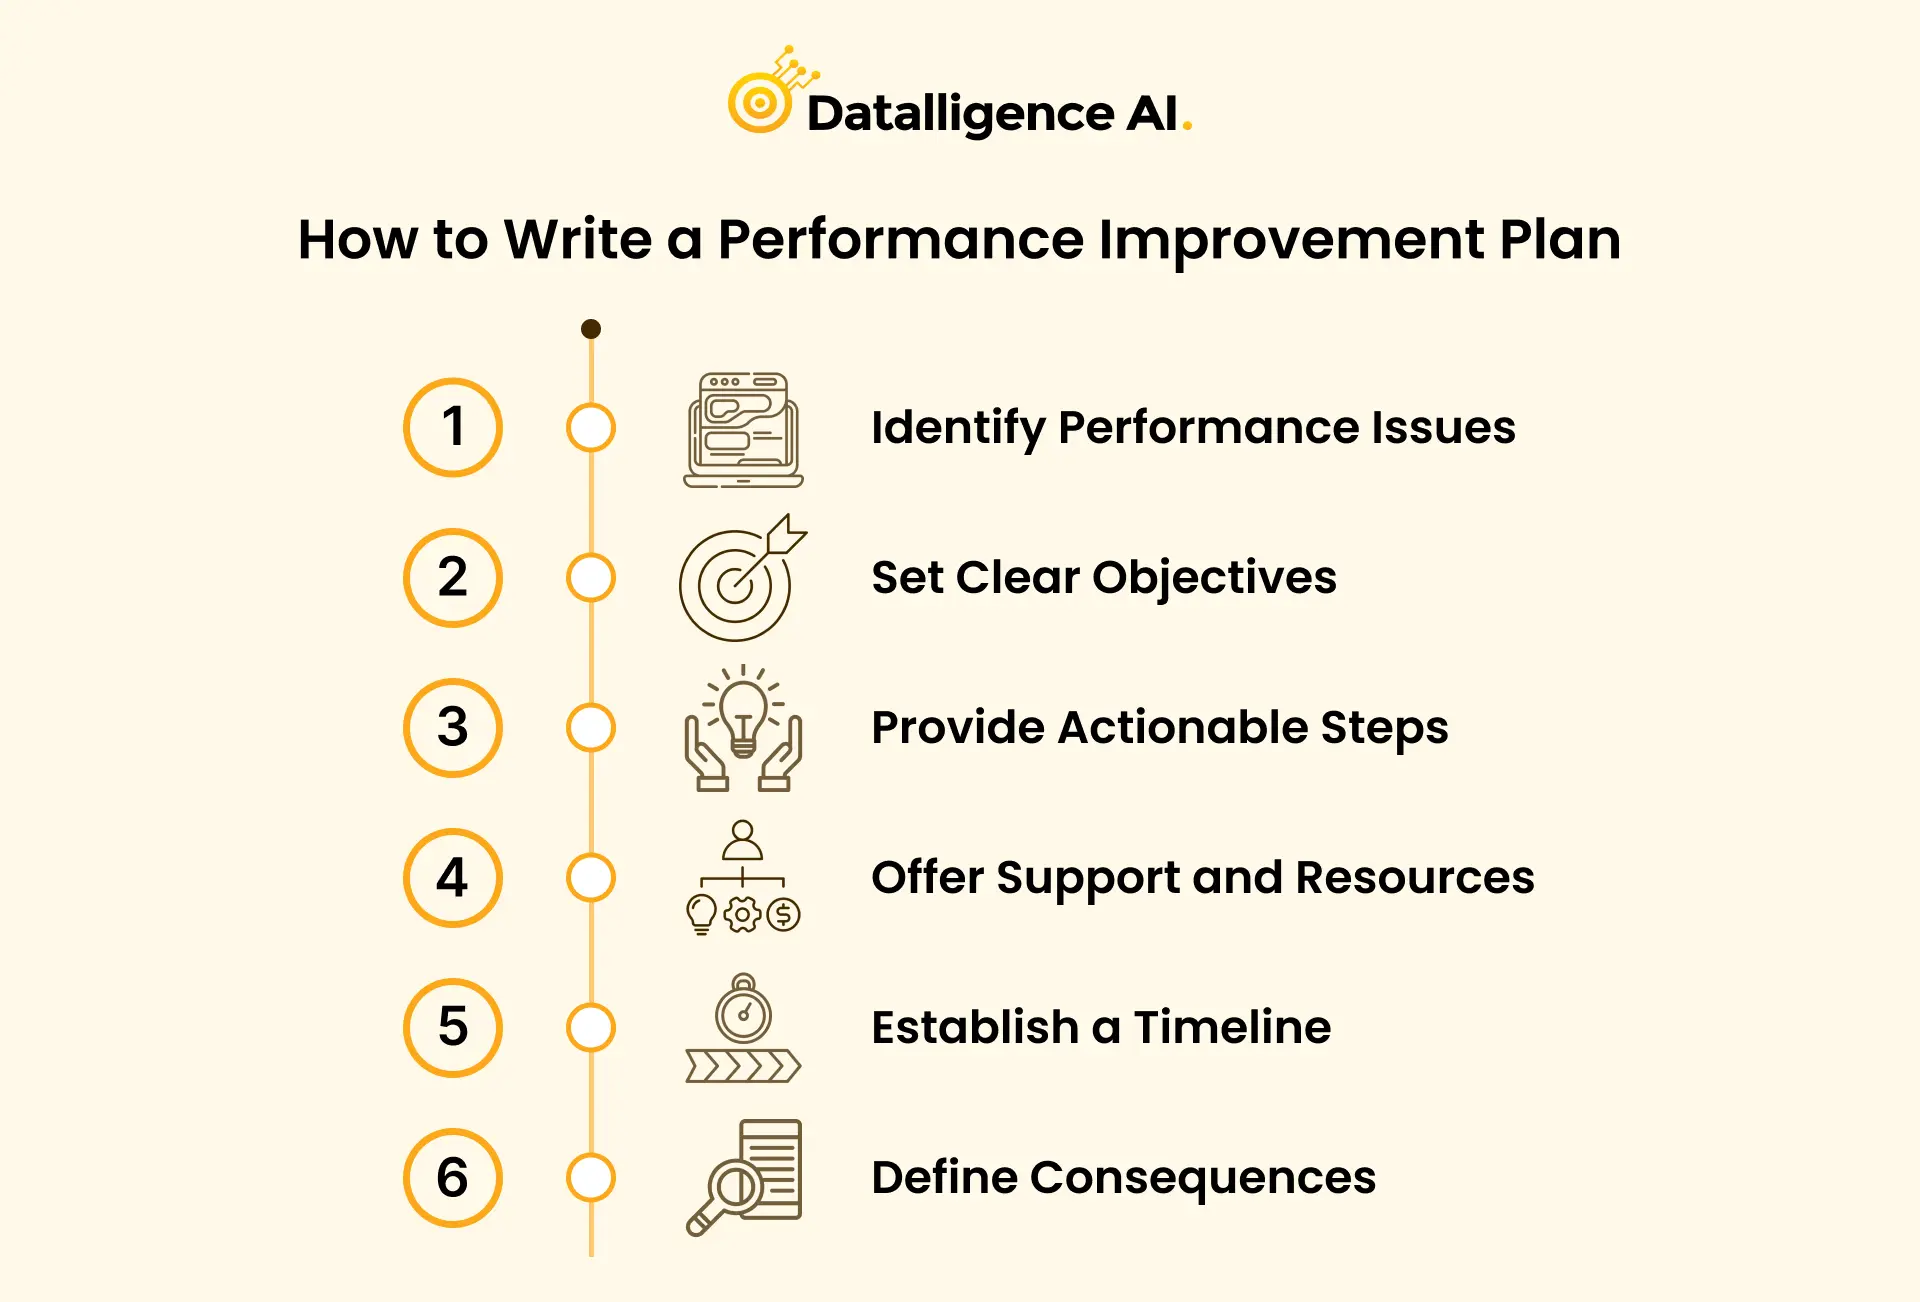 How to Write a Performance Improvement Plan-Datalligence